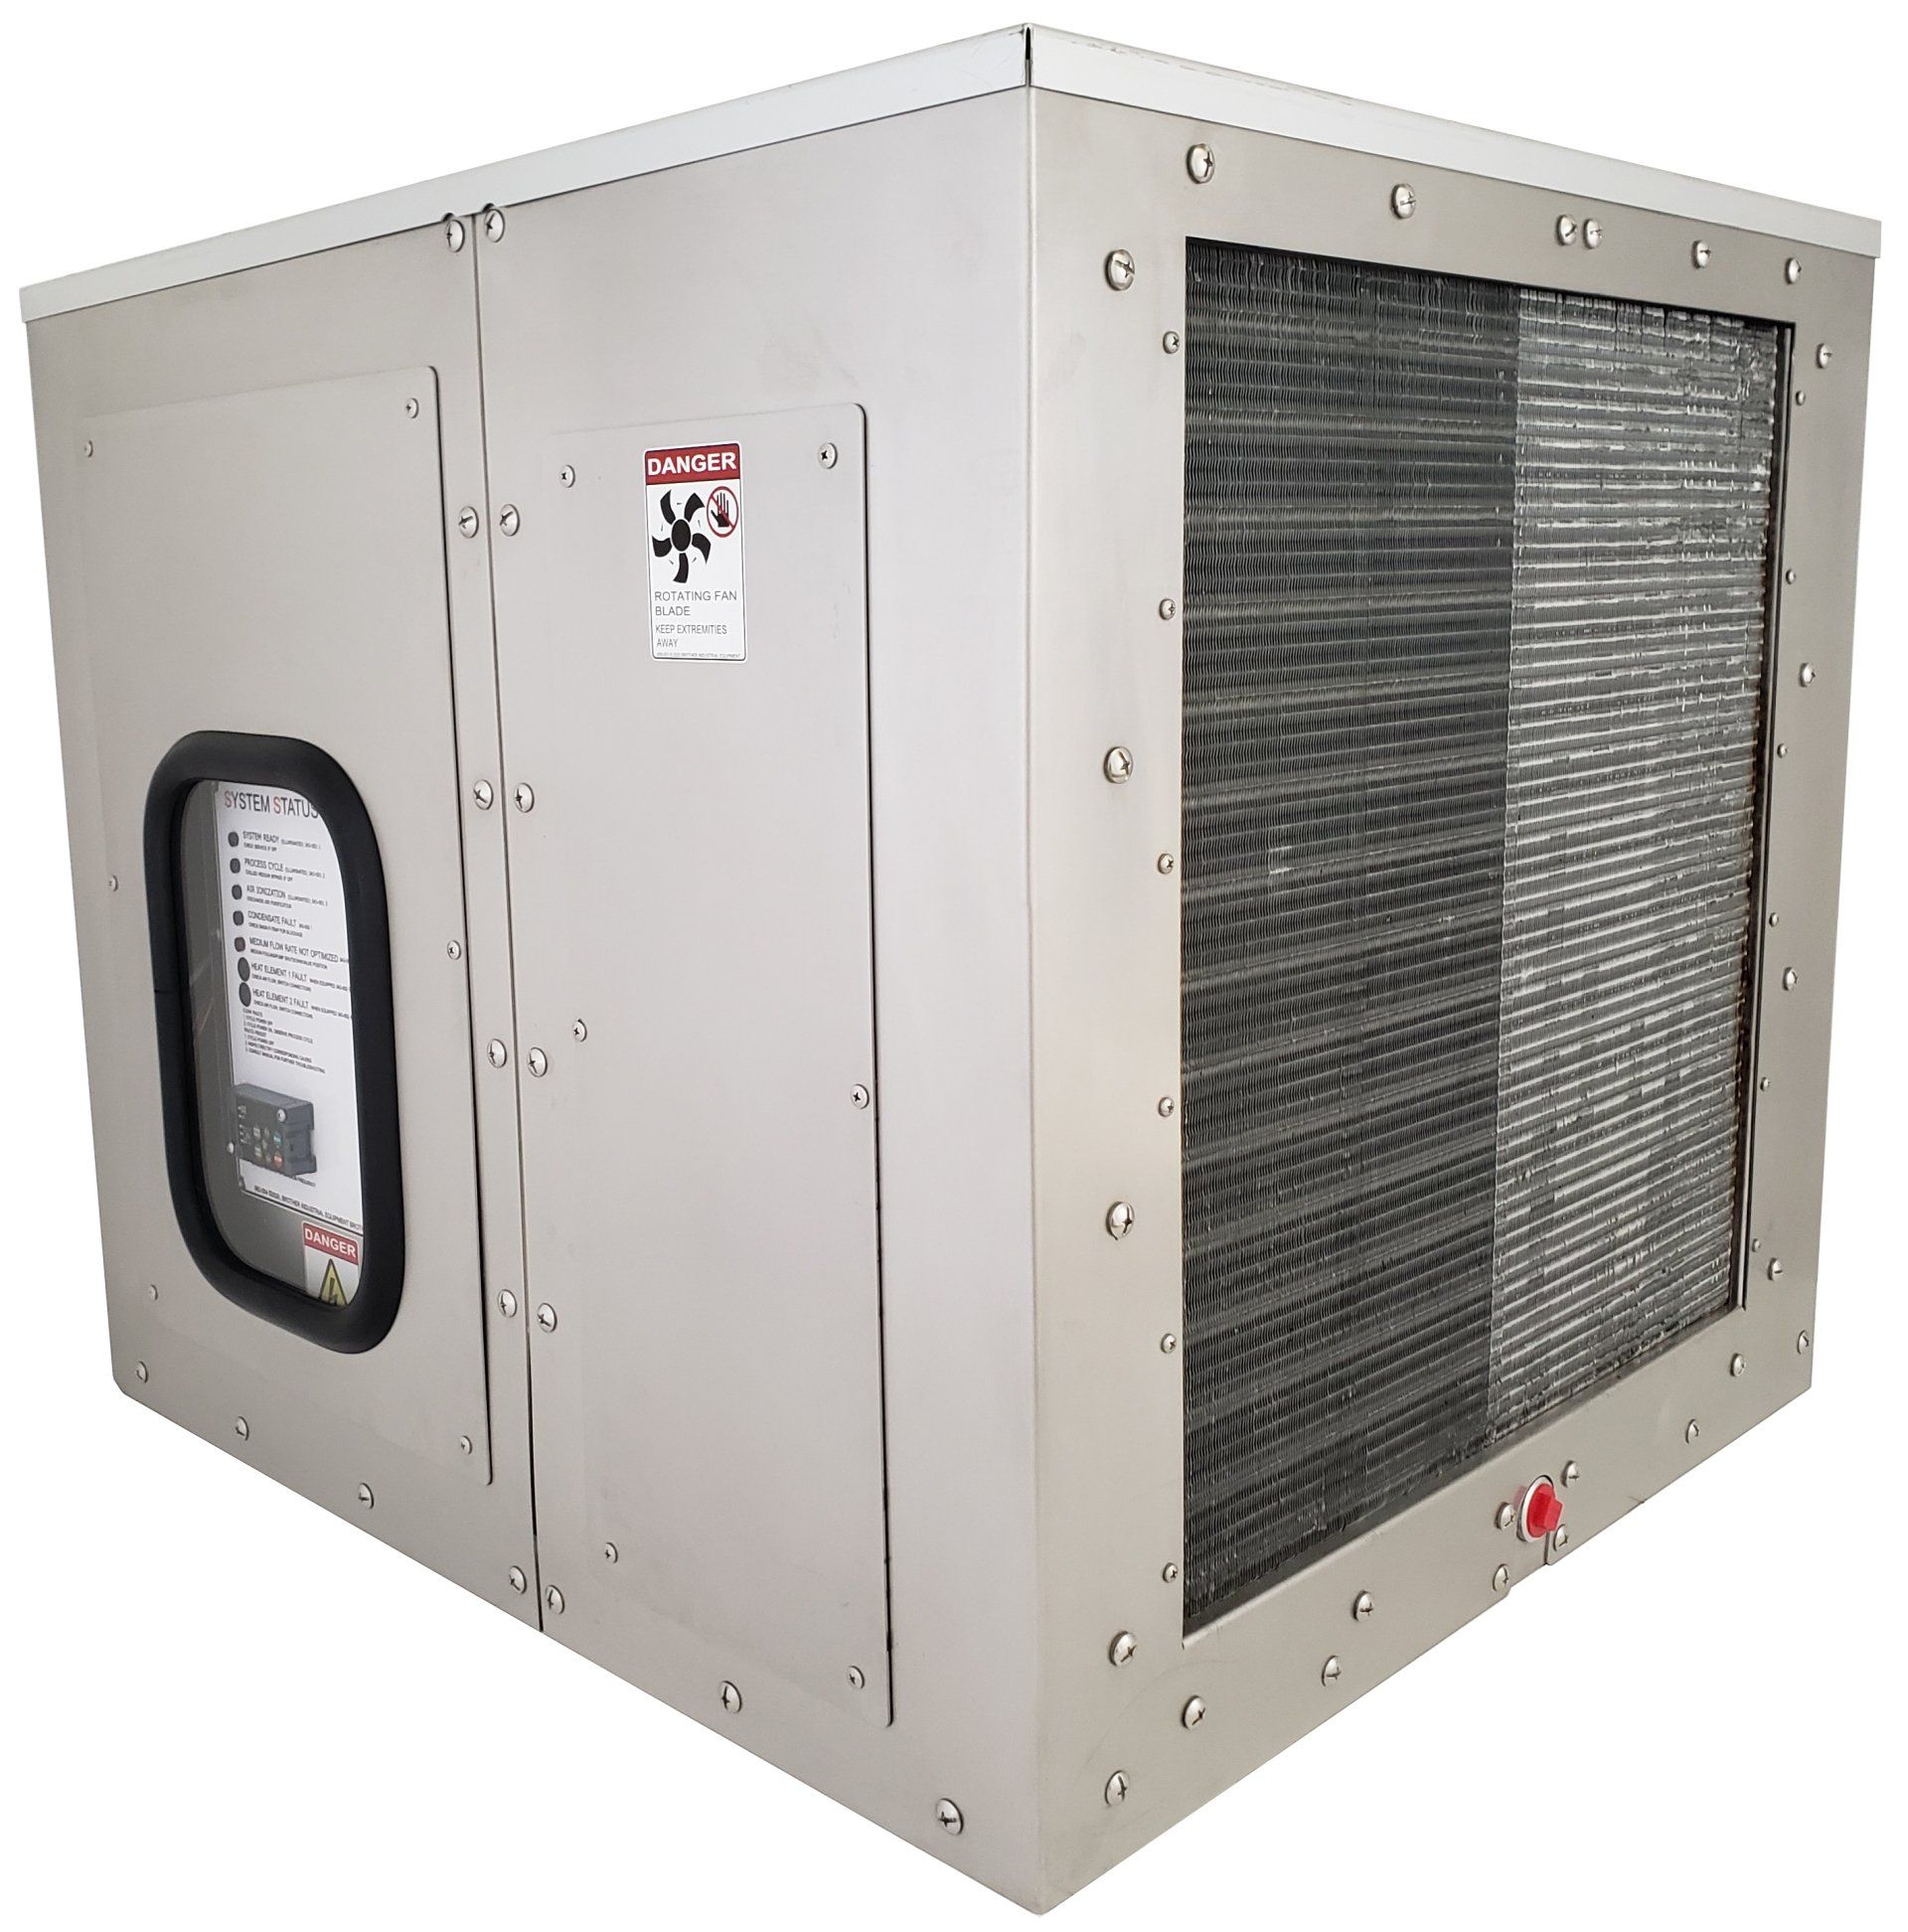 Brother glycol fan coil, AHU, air handler